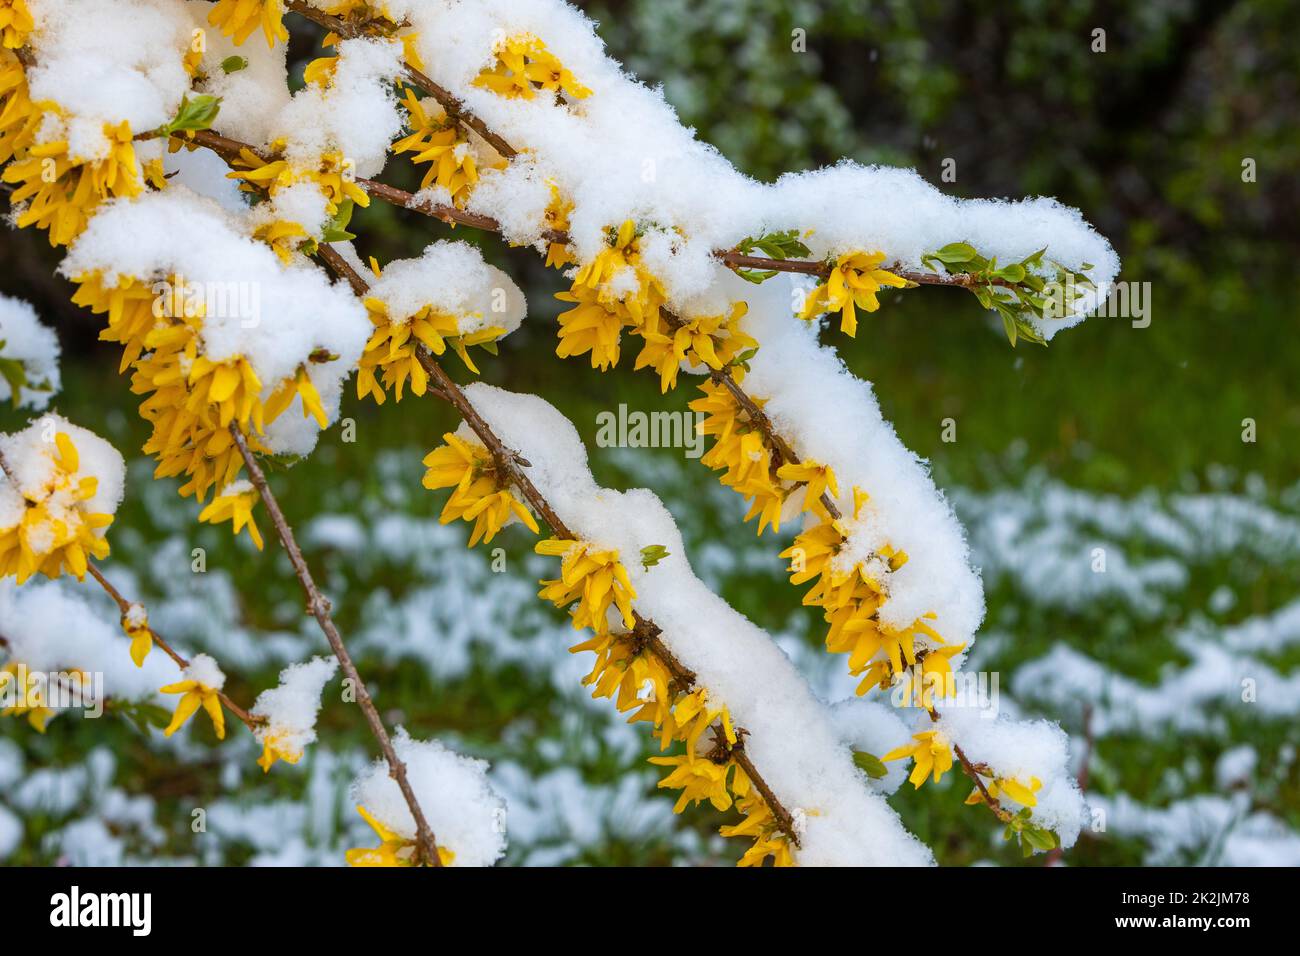 onset of winter in spring with snow Stock Photo